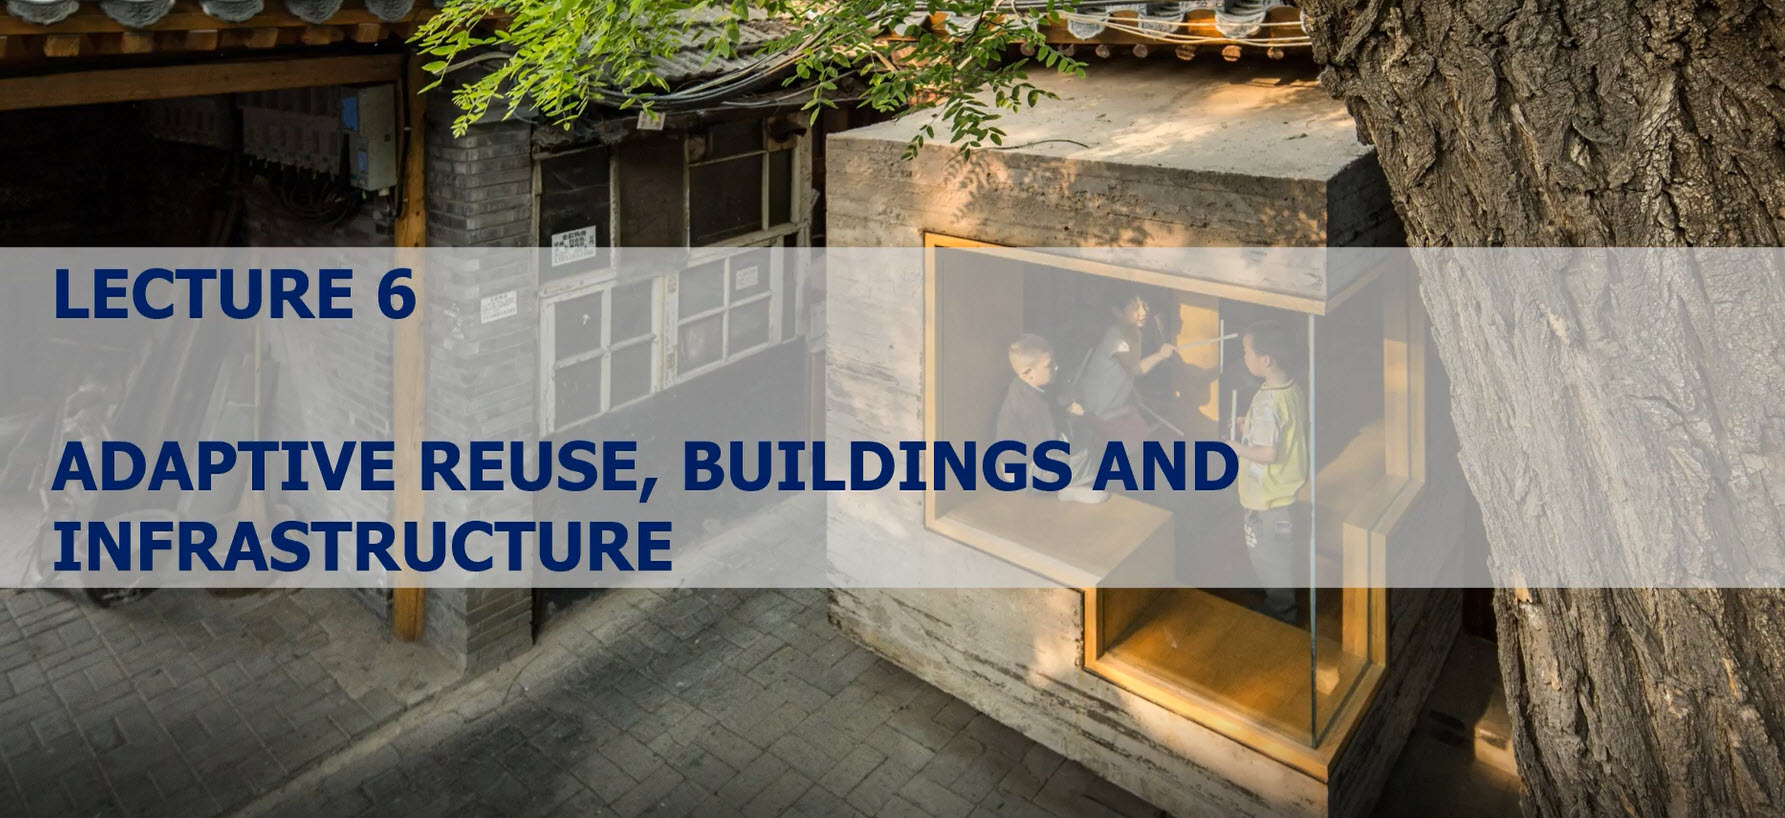 Lecture 20:  Adaptive Reuse, Buildings and Infrastructure Part 1 (narrated version)